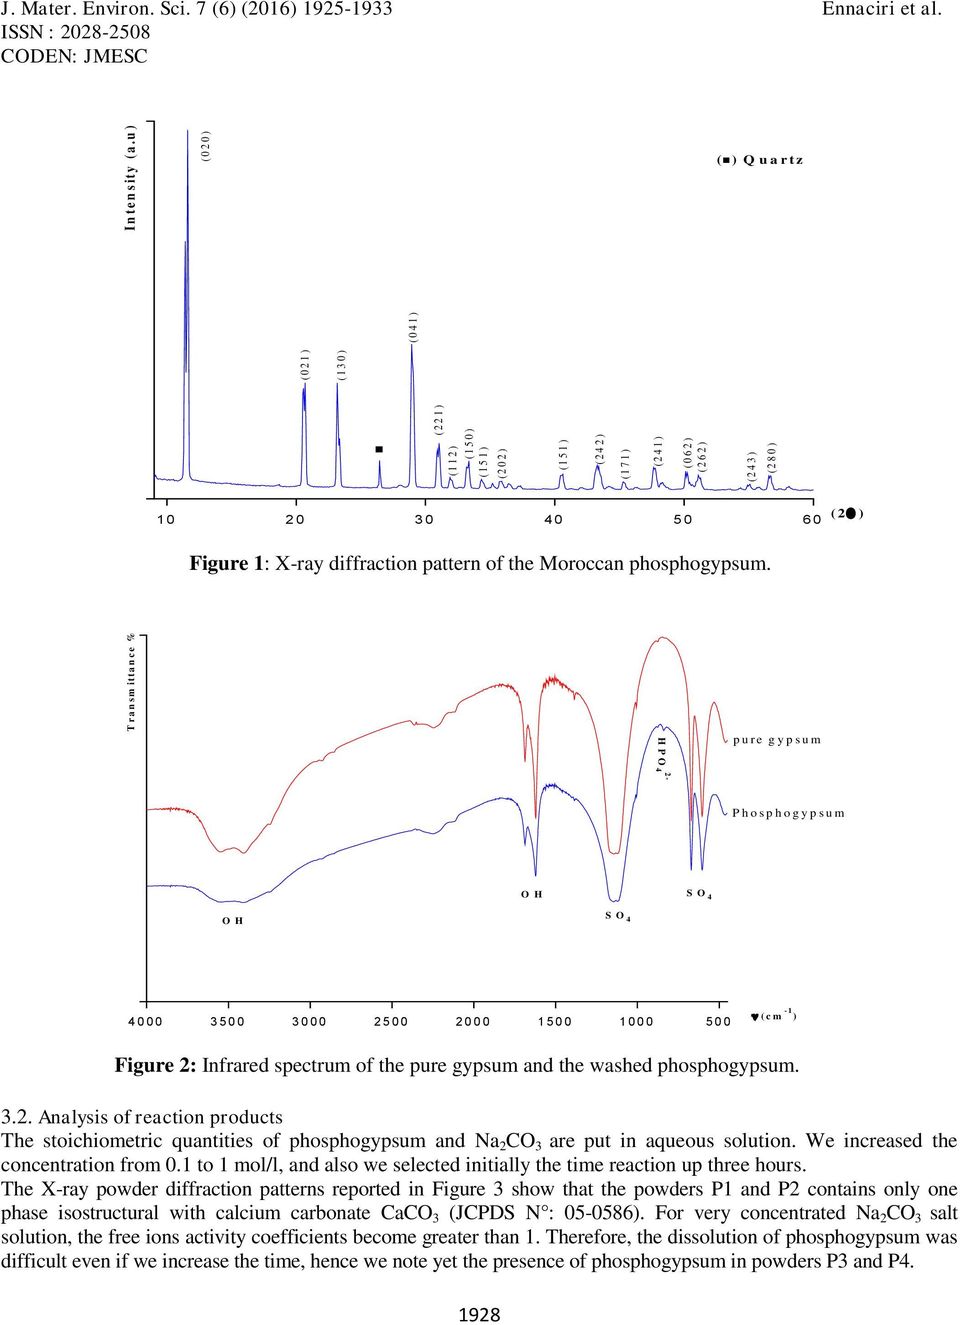 7 5 H P O 4 2 - p u re g y p s u m P h o s p h o g y p s u m 4 3 5 3 2 5 2 1 5 1 5 ( c m -1 ) Figure 2: Infrared spectrum of the pure gypsum and the washed phosphogypsum. 3.2. Analysis of reaction products The stoichiometric quantities of phosphogypsum and Na 2 CO 3 are put in aqueous solution.